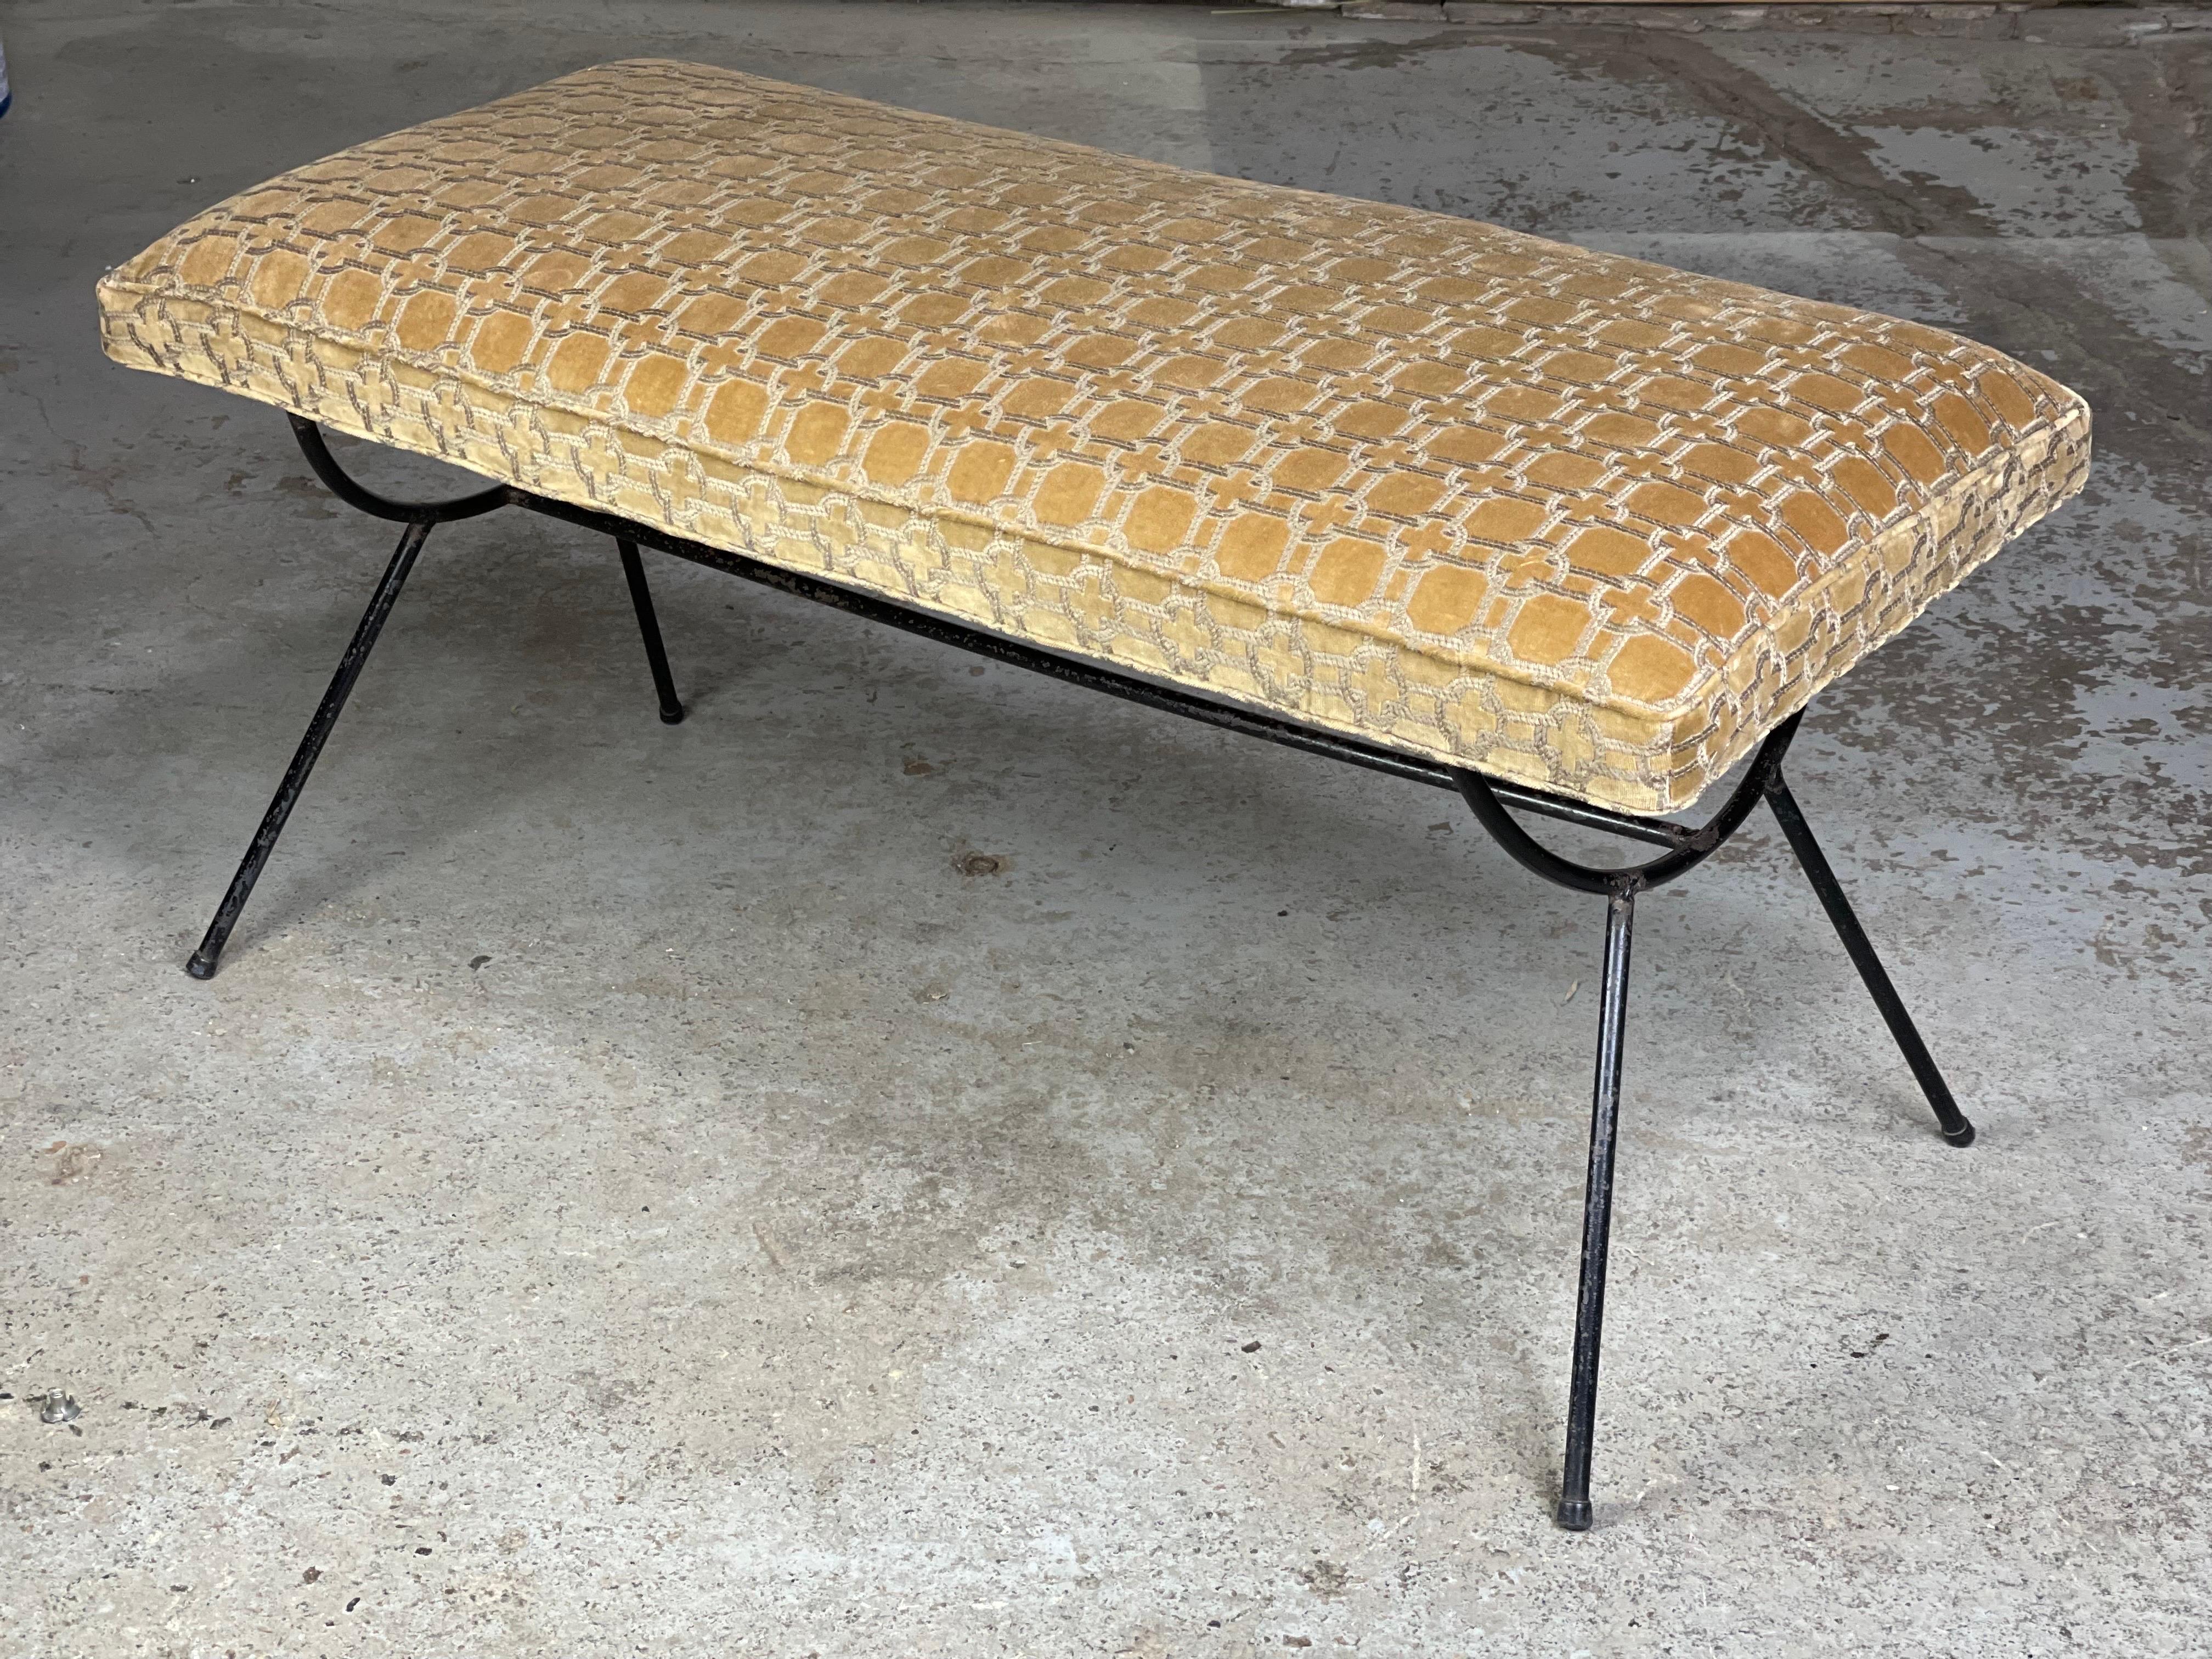 Lovely upholstered 1950's bench by Frank & Sons of Iron, wood & fabric. The iron legs are original - I can repaint the frame if you wish (no charge) just ask...
The fabric is very nice - thick and soft with monochromatic colors and print scheme.